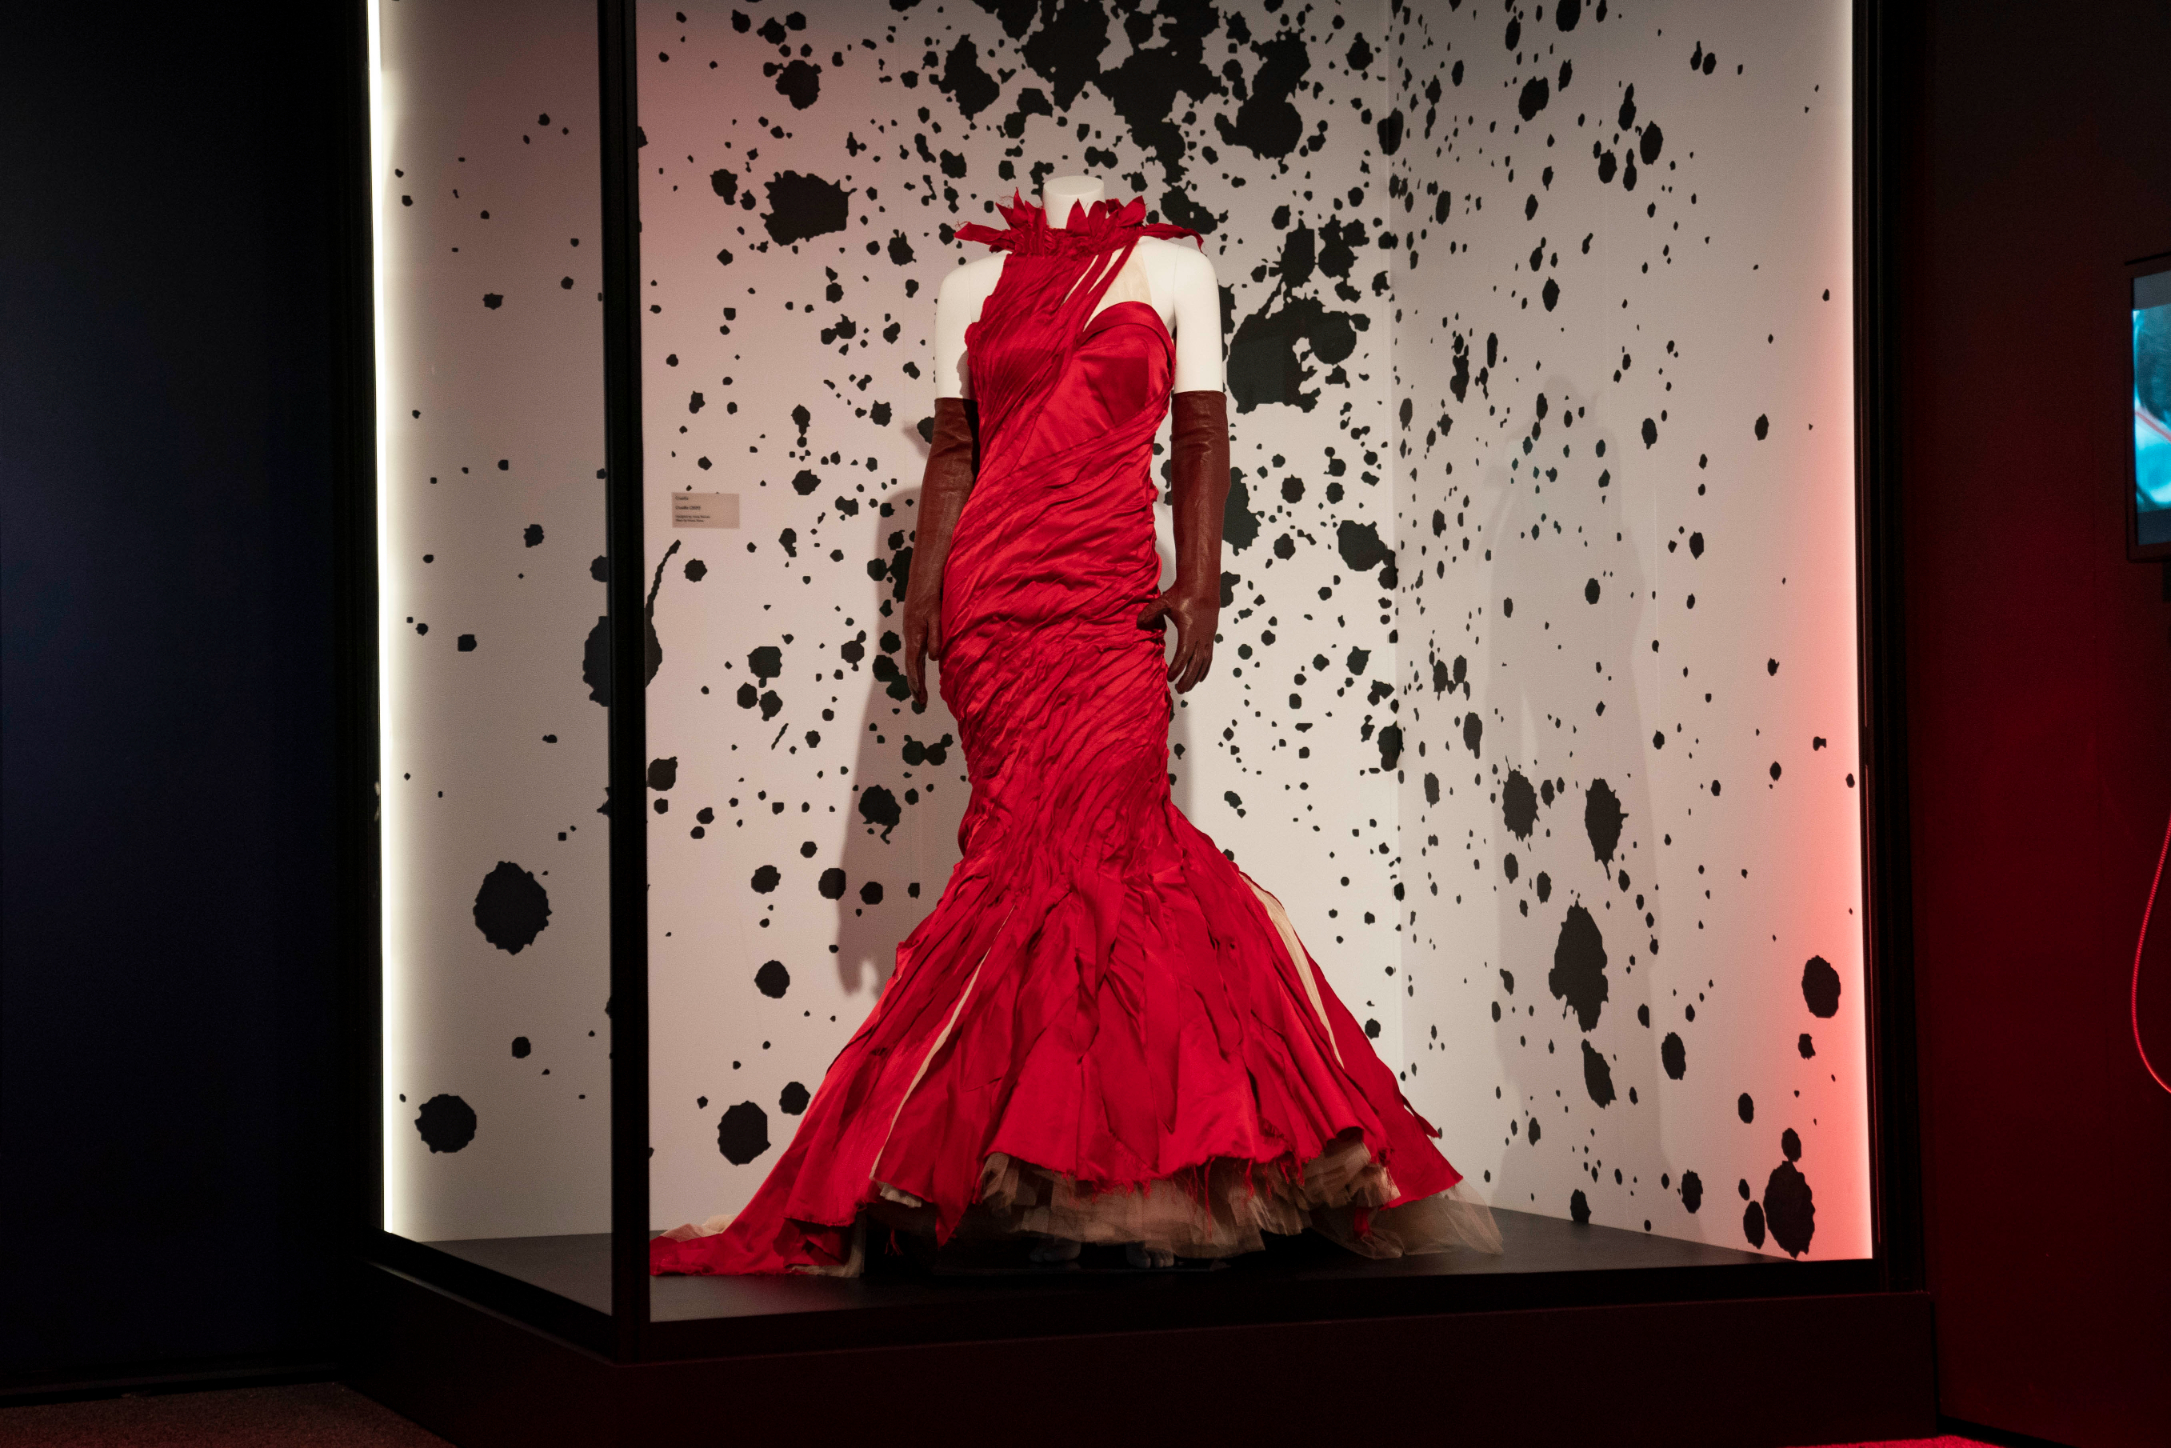 Costume worn by Emma Stone in the live-action film Cruella (2021) on display at Disney100: The Exhibition, now open at The Franklin Institute in Philadelphia. ©Disney